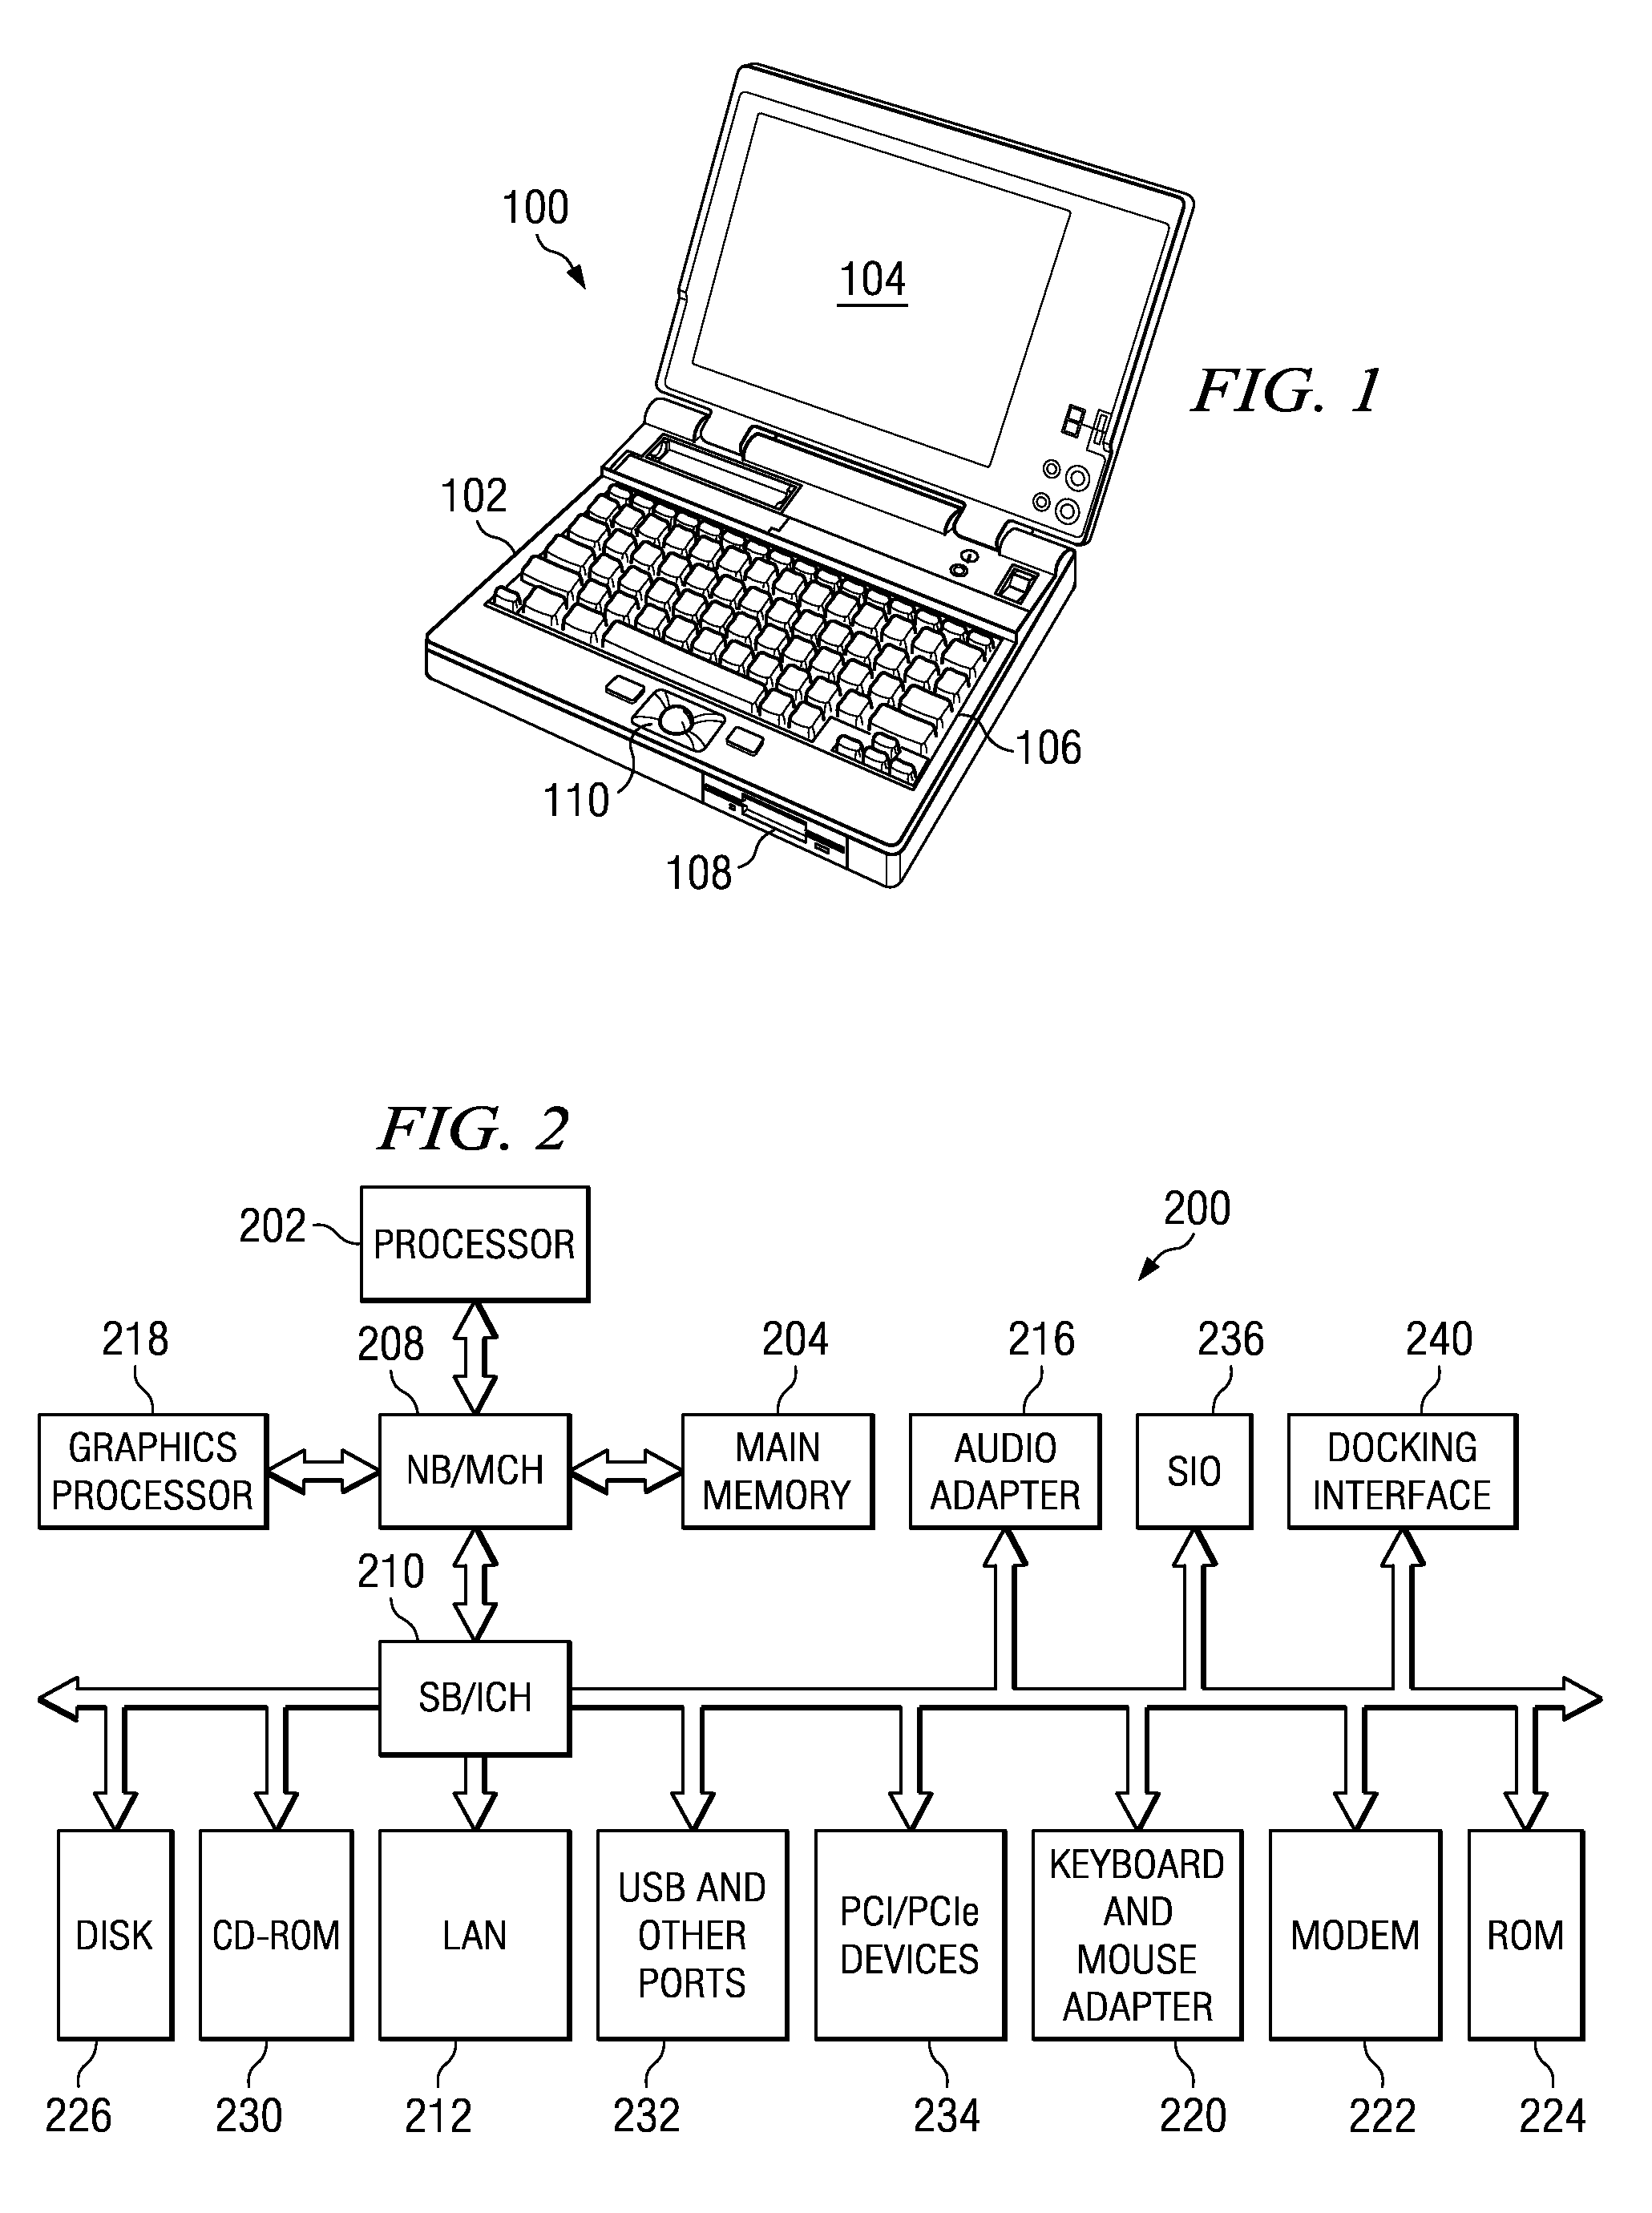 Method, Apparatus, and Program for Implementing an Automation Computing Evaluation Scale to Generate Recommendations